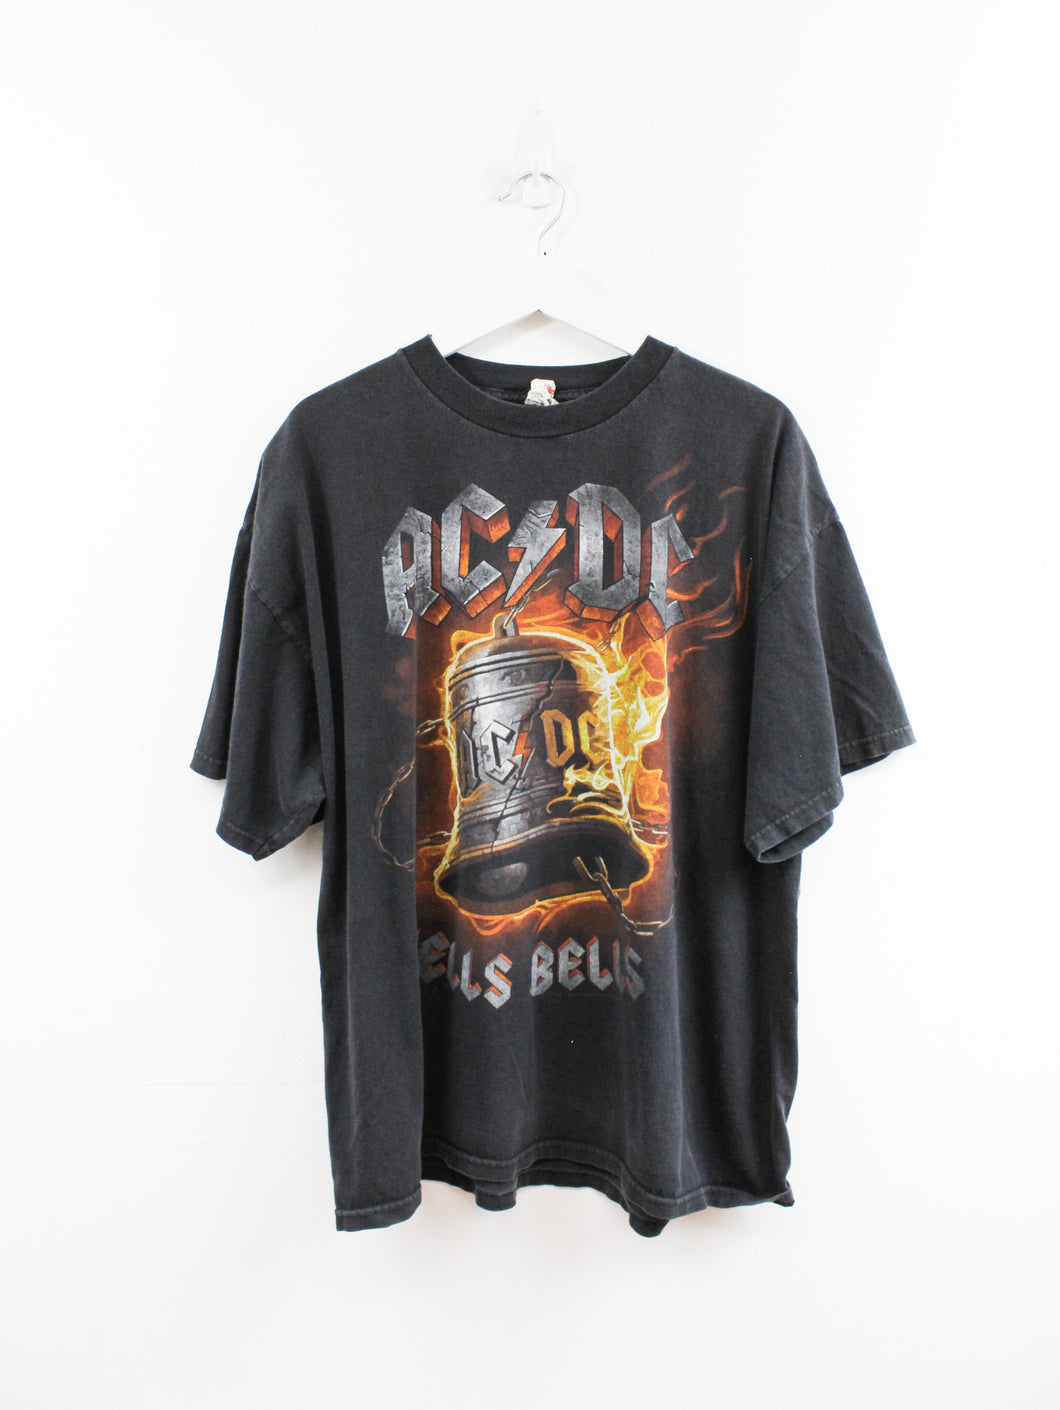 AC/DC Hells Bells Graphic Tee ALSTYLE tag